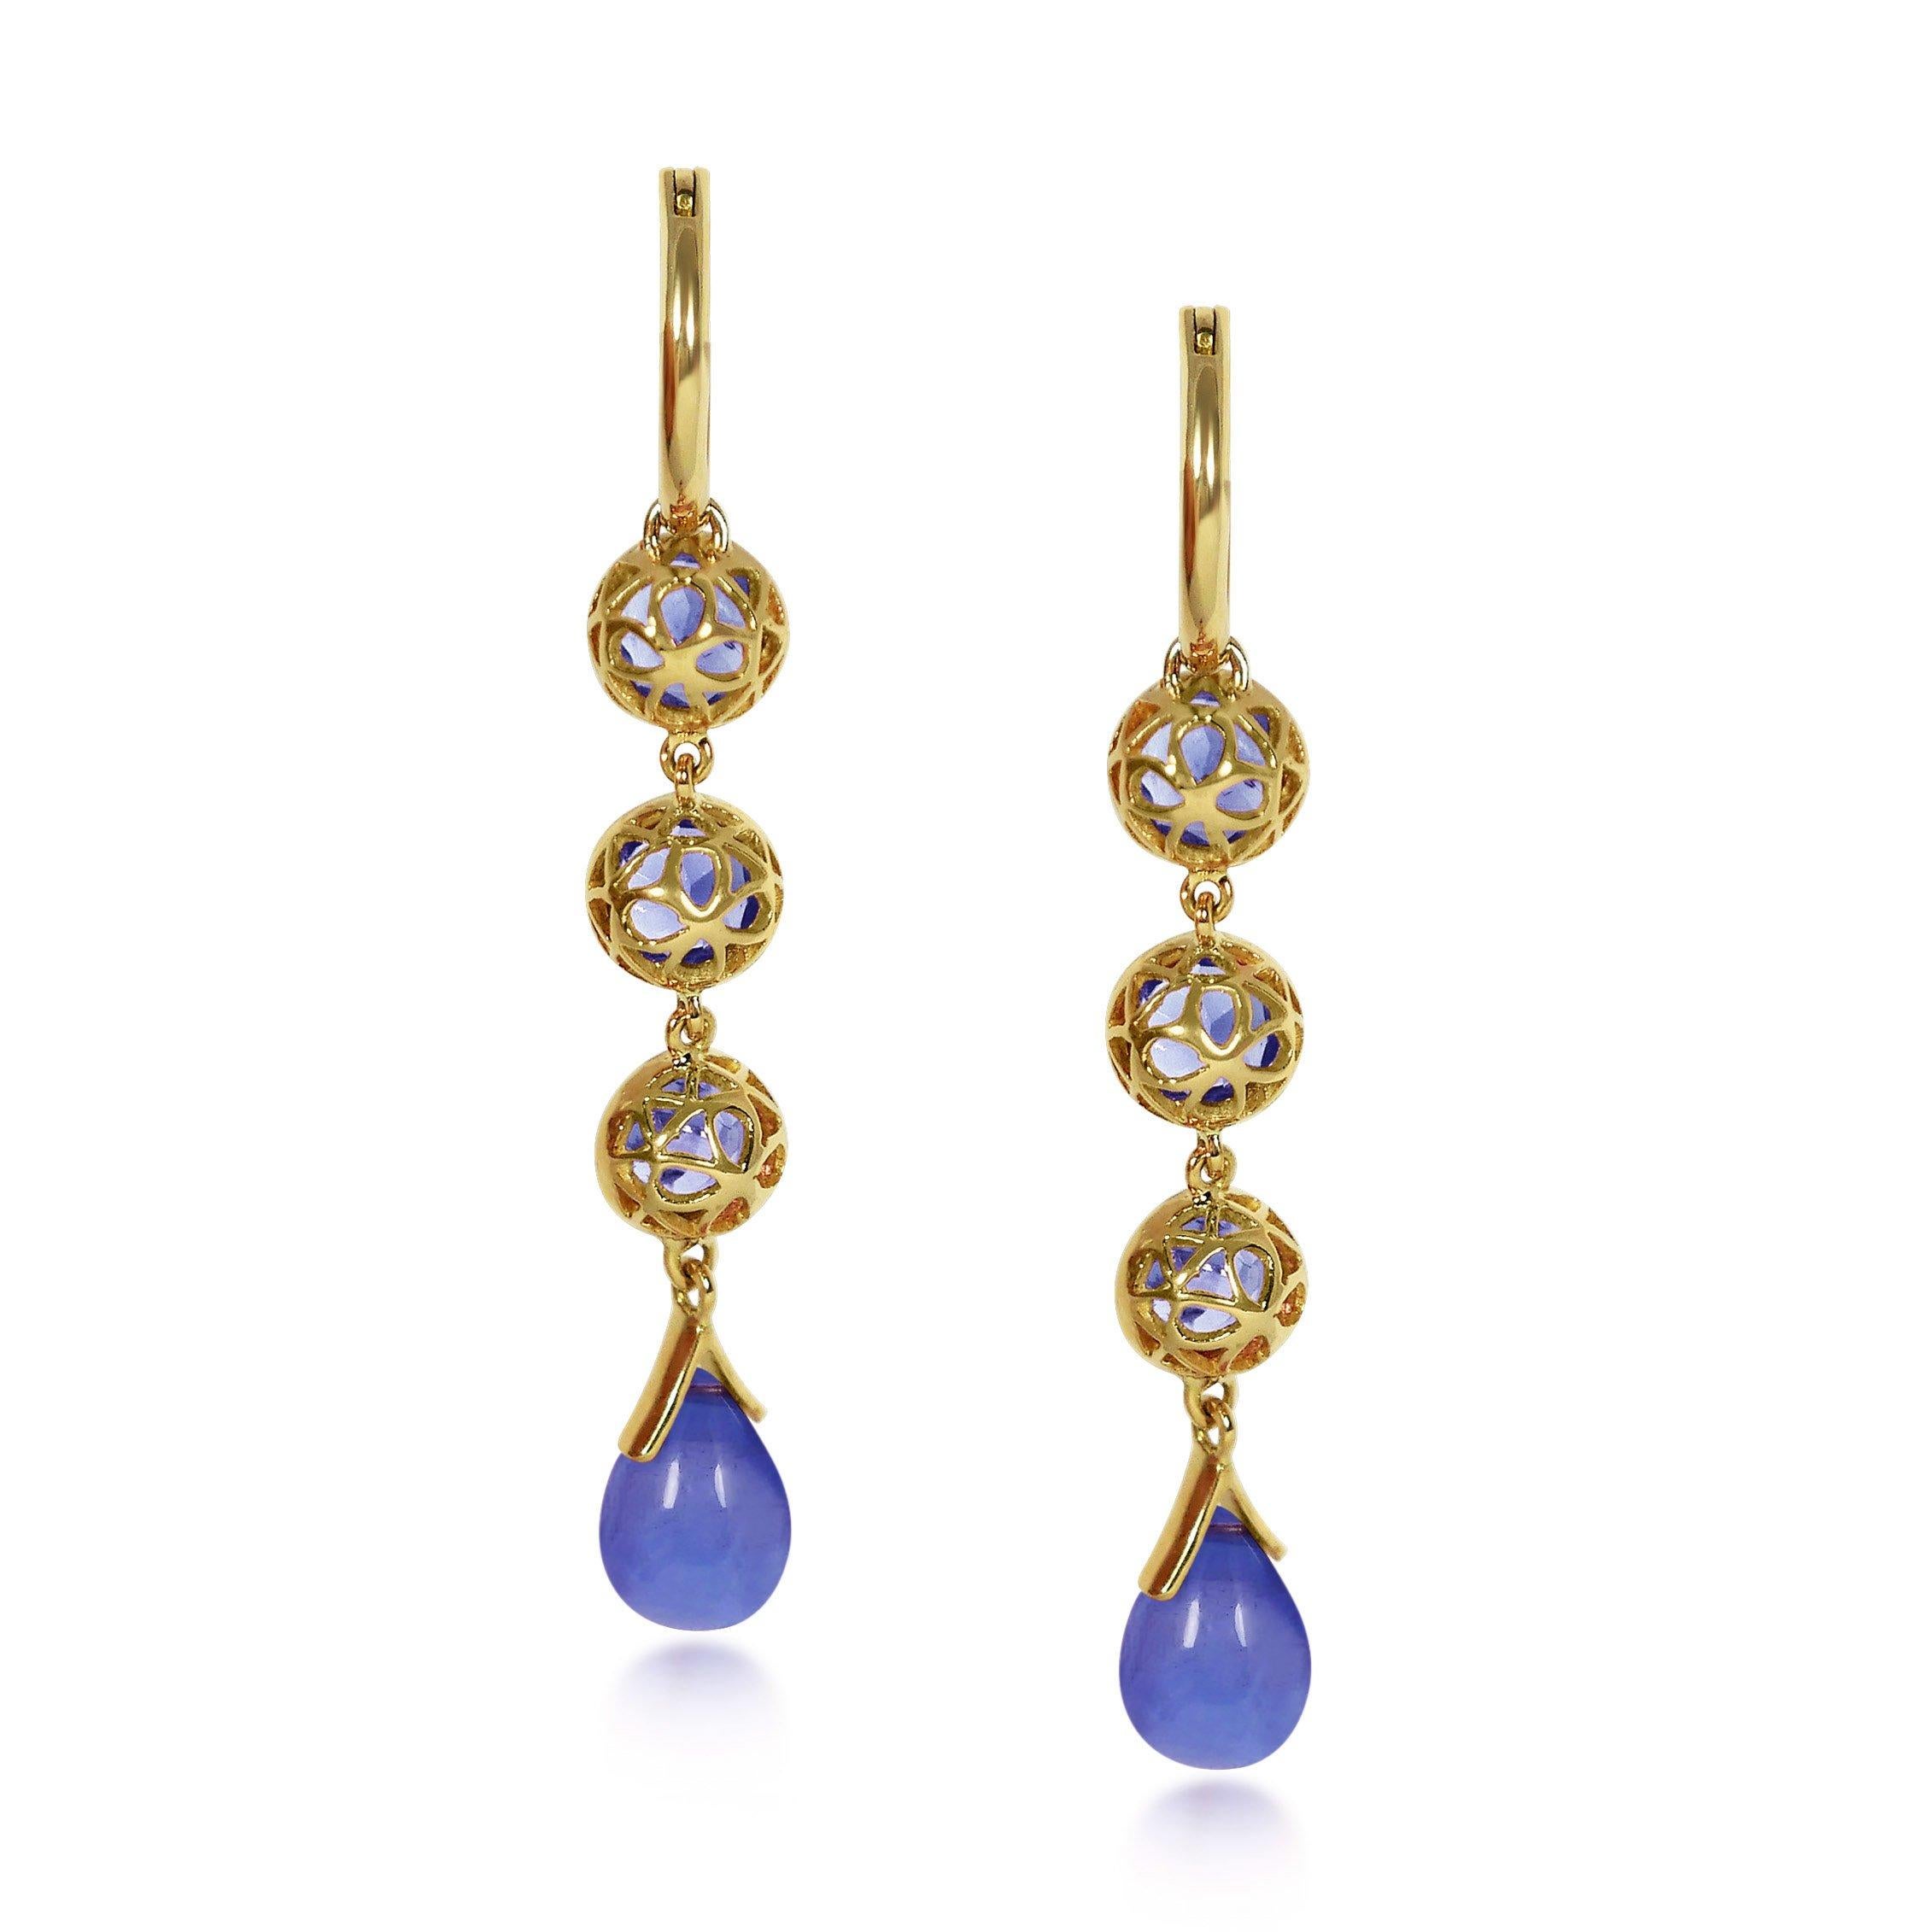 Handcrafted 1.65 Carats Tanzanites 18 Karat Yellow Gold Drop Earrings. Our stone cascade-like earrings are an elegant statement underlined by romantic dancing drops carved in Tanzanite under a set of 6mm round cut Tanzanite stones encased in our